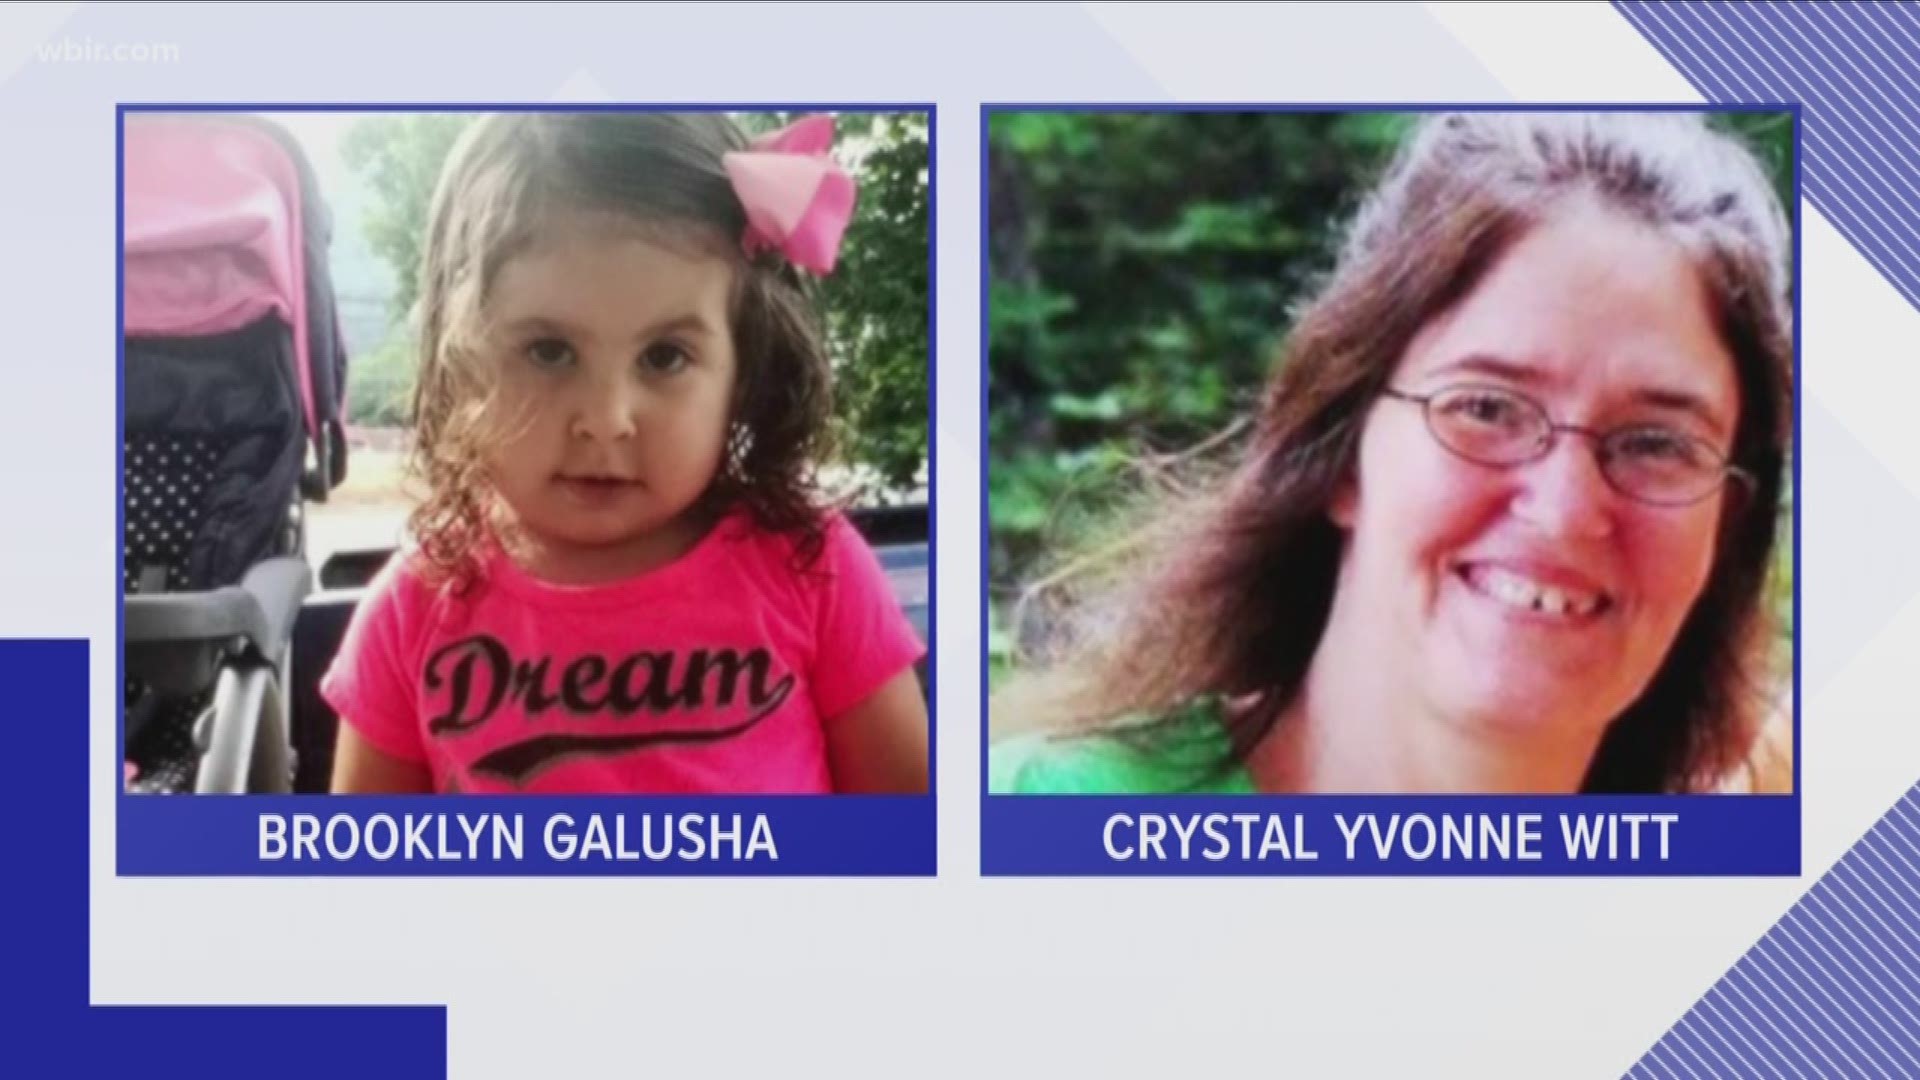 Authorities say 2-year-old Brooklyn Galusha may be with her non-custodial grandmother.